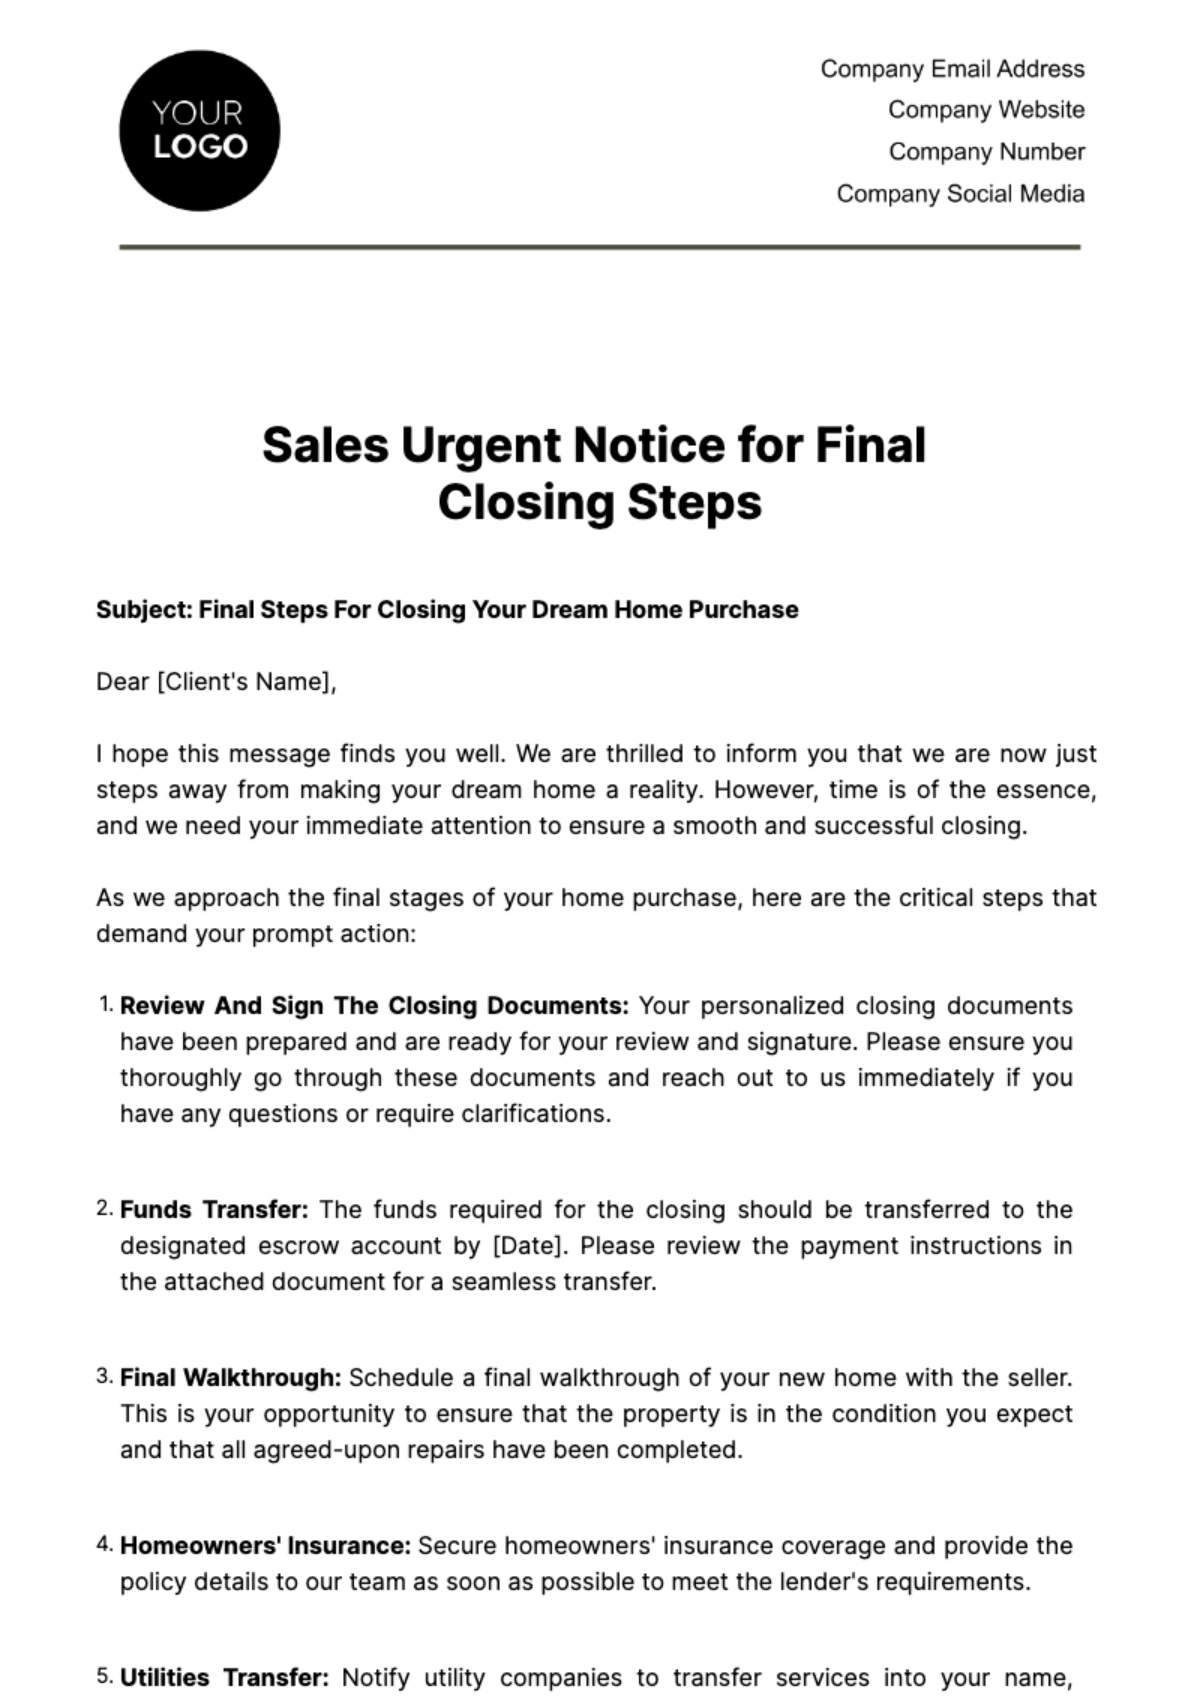 Sales Urgent Notice for Final Closing Steps Template